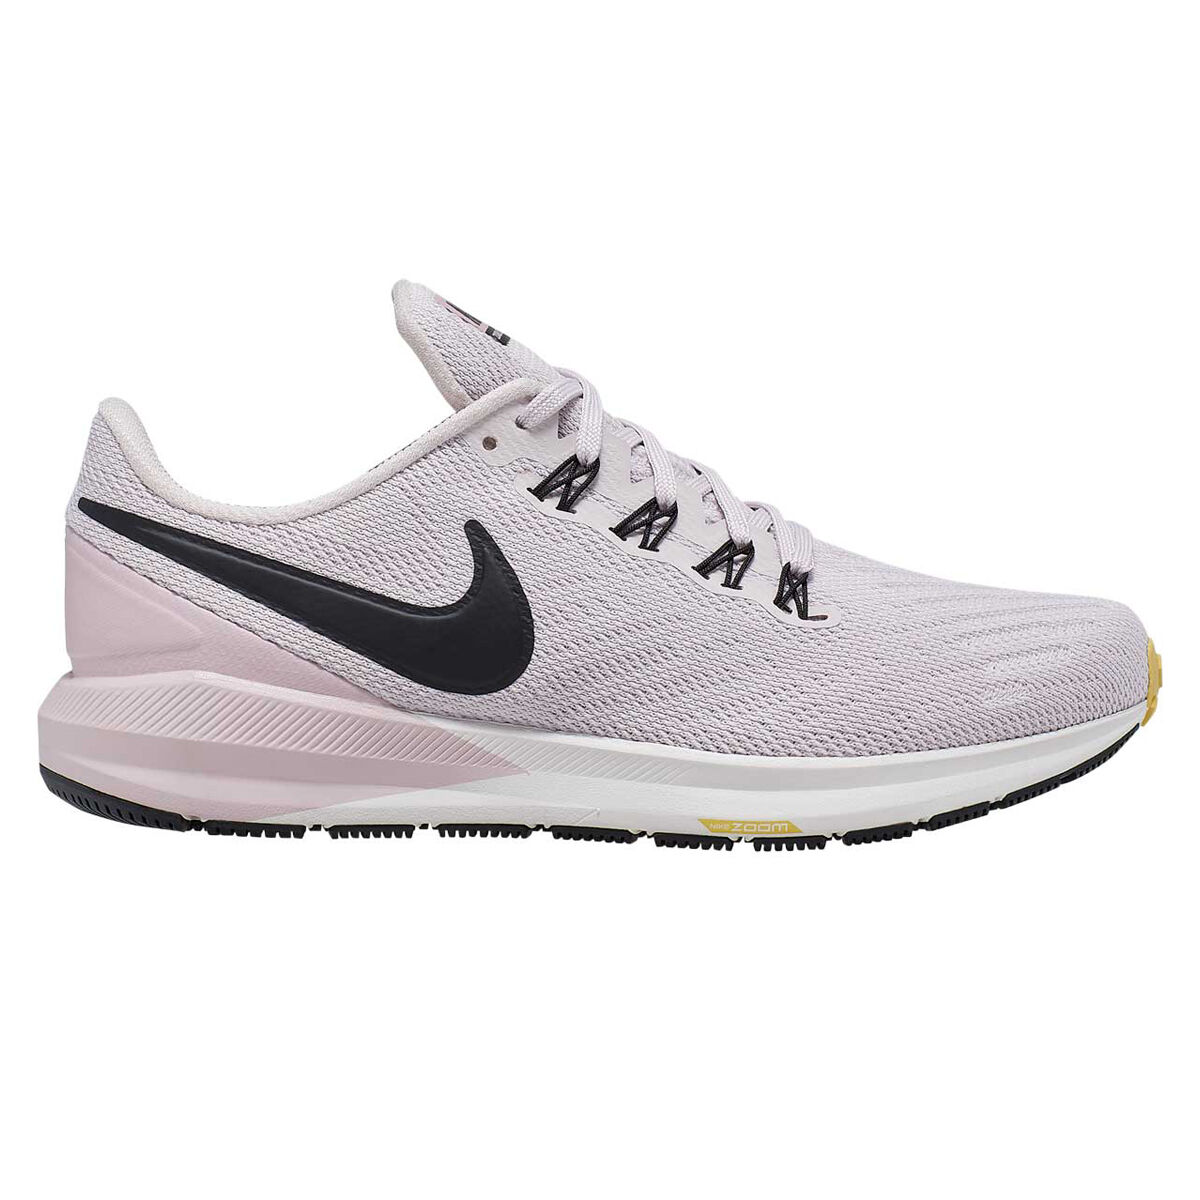 nike zoom structure 16 women's